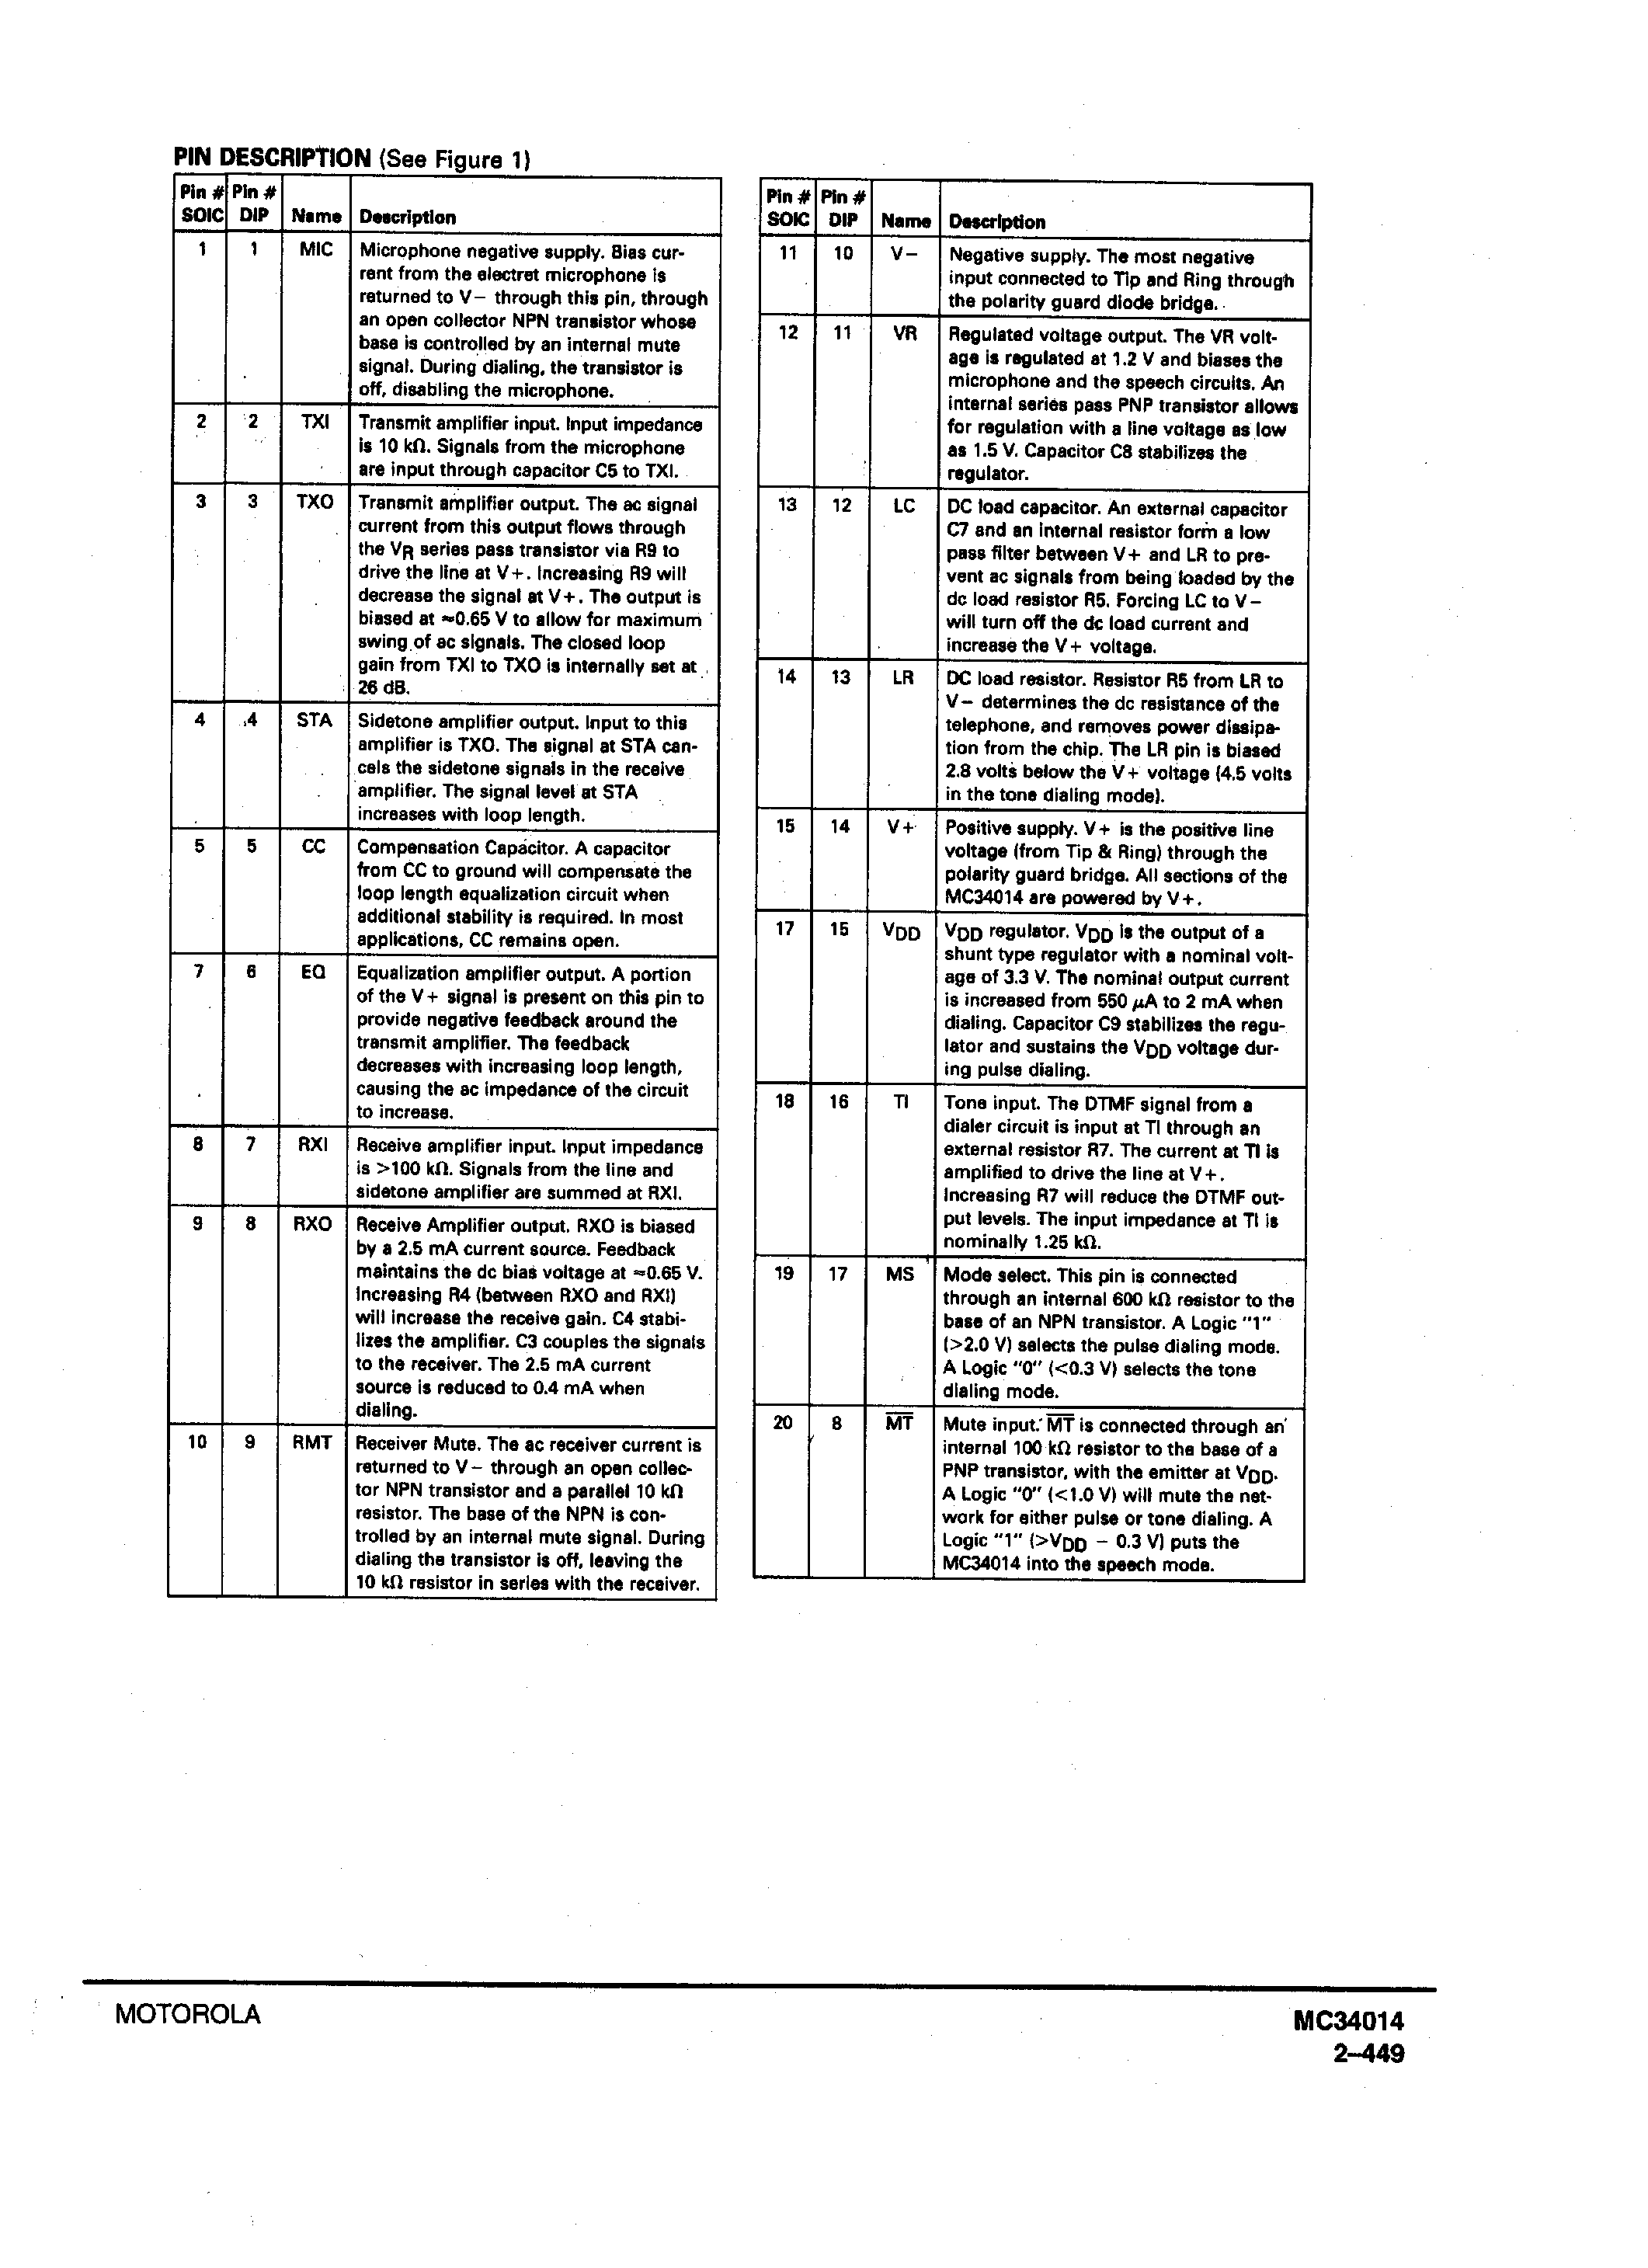 Datasheet MC34014 - TELEPONE SPEECH NETWORK WITH DIALER INTERFACE page 2